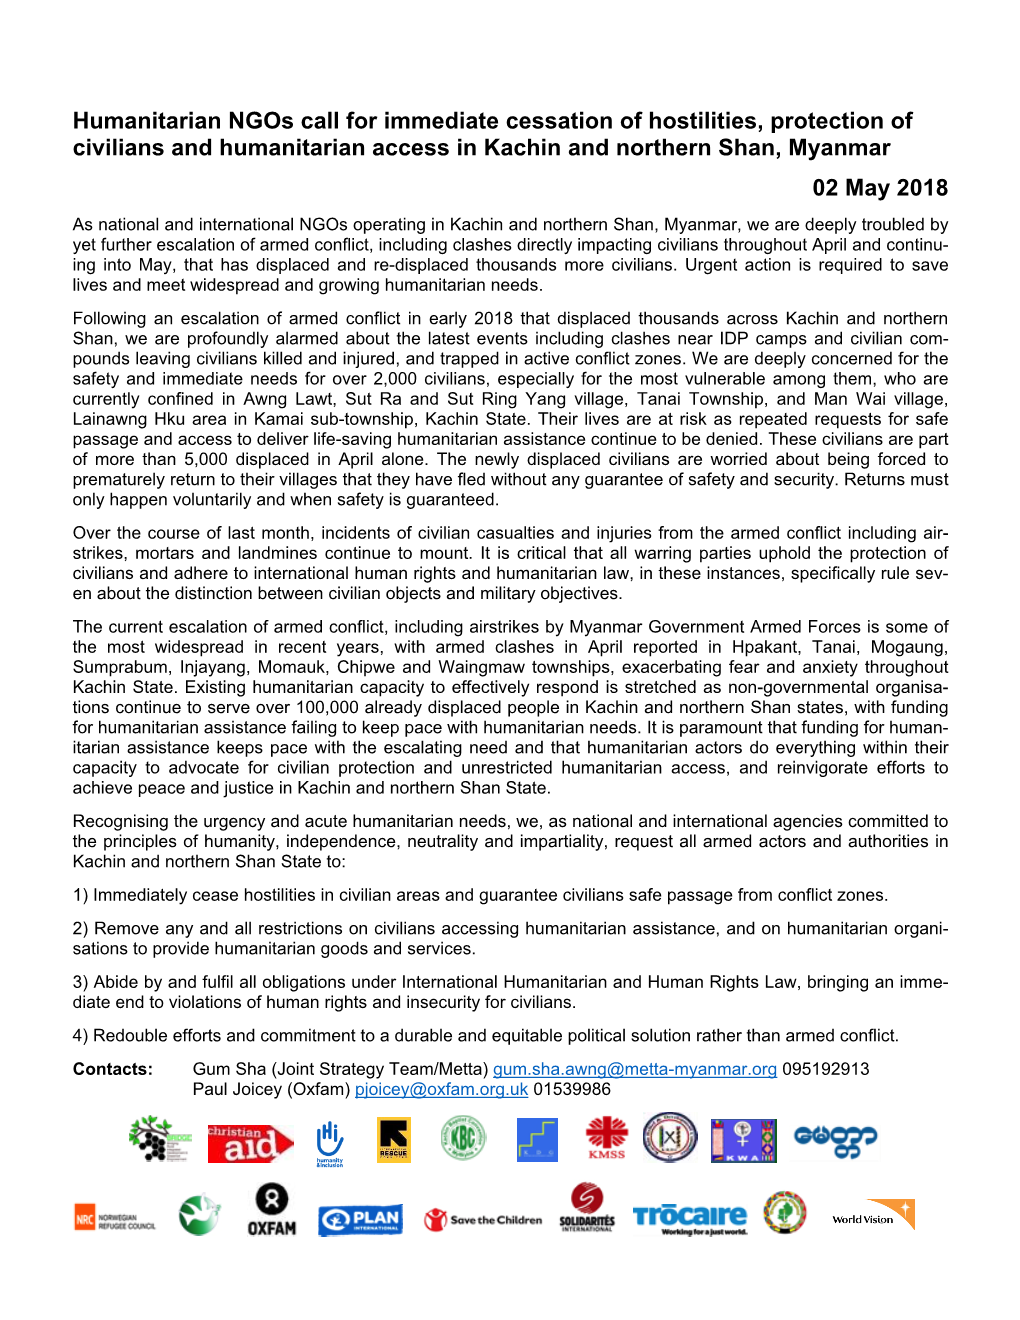 Humanitarian Ngos Call for Immediate Cessation of Hostilities